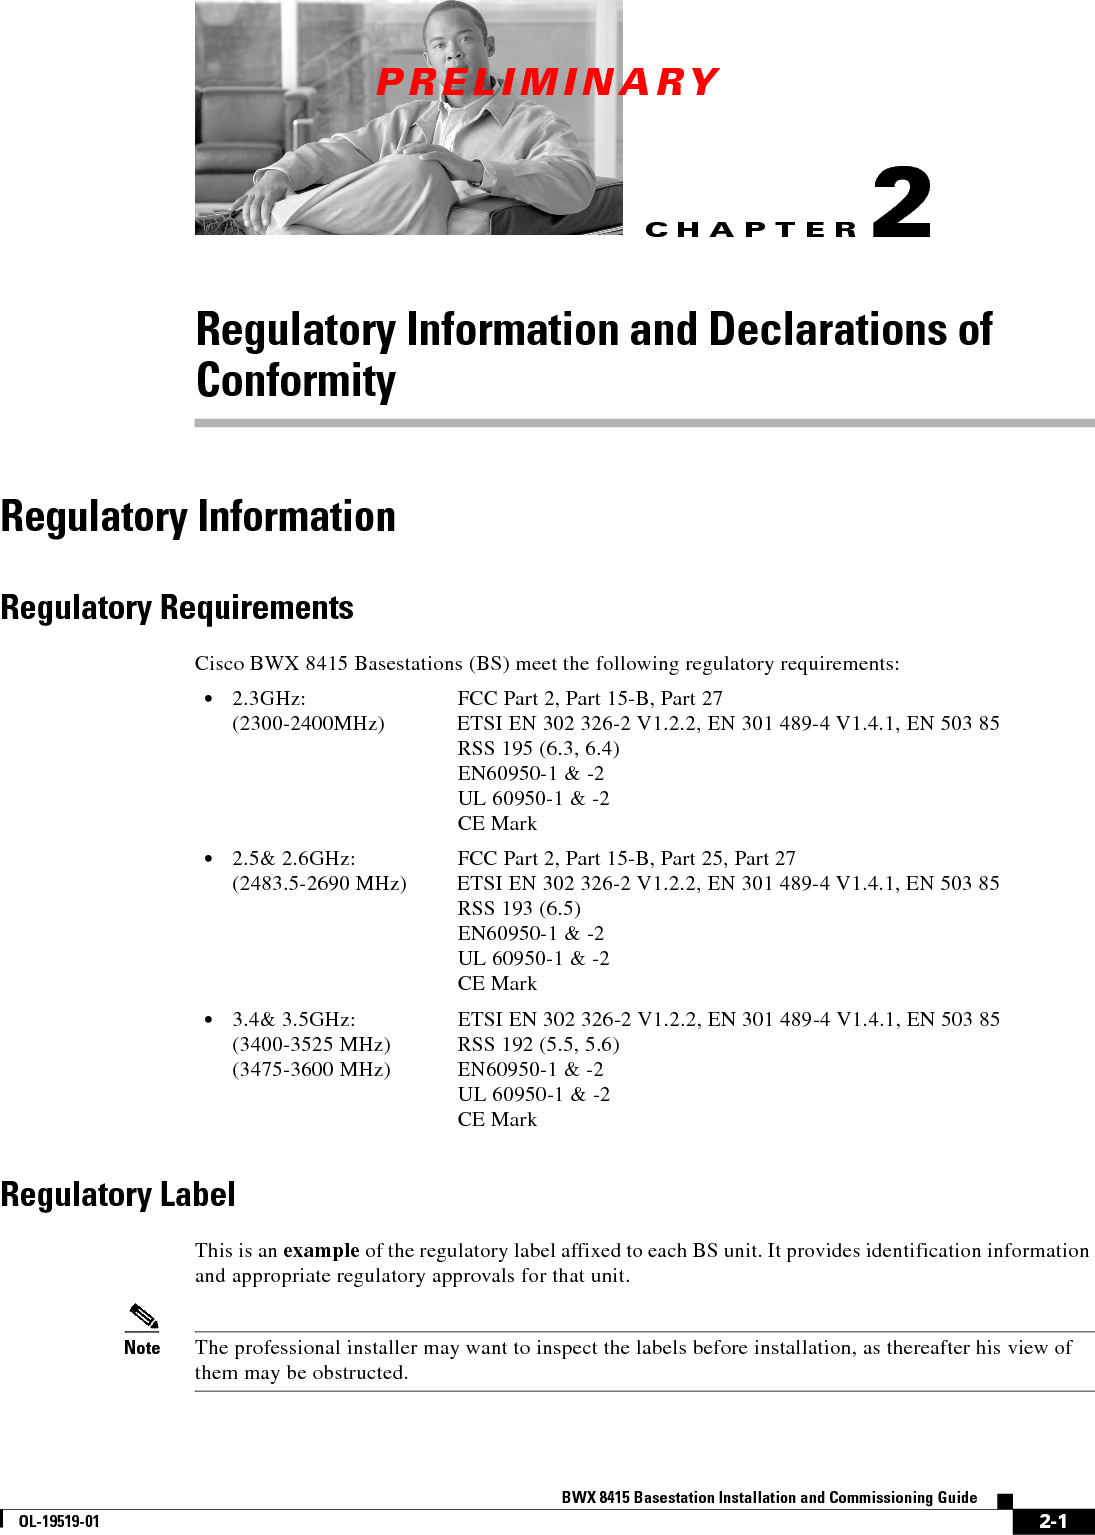 CHAPTERPRELIMINARY2-1BWX 8415 Basestation Installation and Commissioning GuideOL-19519-012Regulatory Information and Declarations of ConformityRegulatory InformationRegulatory RequirementsCisco BWX 8415 Basestations (BS) meet the following regulatory requirements:   • 2.3GHz: FCC Part 2, Part 15-B, Part 27 (2300-2400MHz) ETSI EN 302 326-2 V1.2.2, EN 301 489-4 V1.4.1, EN 503 85 RSS 195 (6.3, 6.4) EN60950-1 &amp; -2 UL 60950-1 &amp; -2 CE Mark  • 2.5&amp; 2.6GHz: FCC Part 2, Part 15-B, Part 25, Part 27 (2483.5-2690 MHz) ETSI EN 302 326-2 V1.2.2, EN 301 489-4 V1.4.1, EN 503 85 RSS 193 (6.5) EN60950-1 &amp; -2 UL 60950-1 &amp; -2 CE Mark  • 3.4&amp; 3.5GHz: ETSI EN 302 326-2 V1.2.2, EN 301 489-4 V1.4.1, EN 503 85 (3400-3525 MHz) RSS 192 (5.5, 5.6) (3475-3600 MHz) EN60950-1 &amp; -2 UL 60950-1 &amp; -2 CE MarkRegulatory LabelThis is an example of the regulatory label affixed to each BS unit. It provides identification information and appropriate regulatory approvals for that unit.   Note The professional installer may want to inspect the labels before installation, as thereafter his view of them may be obstructed.